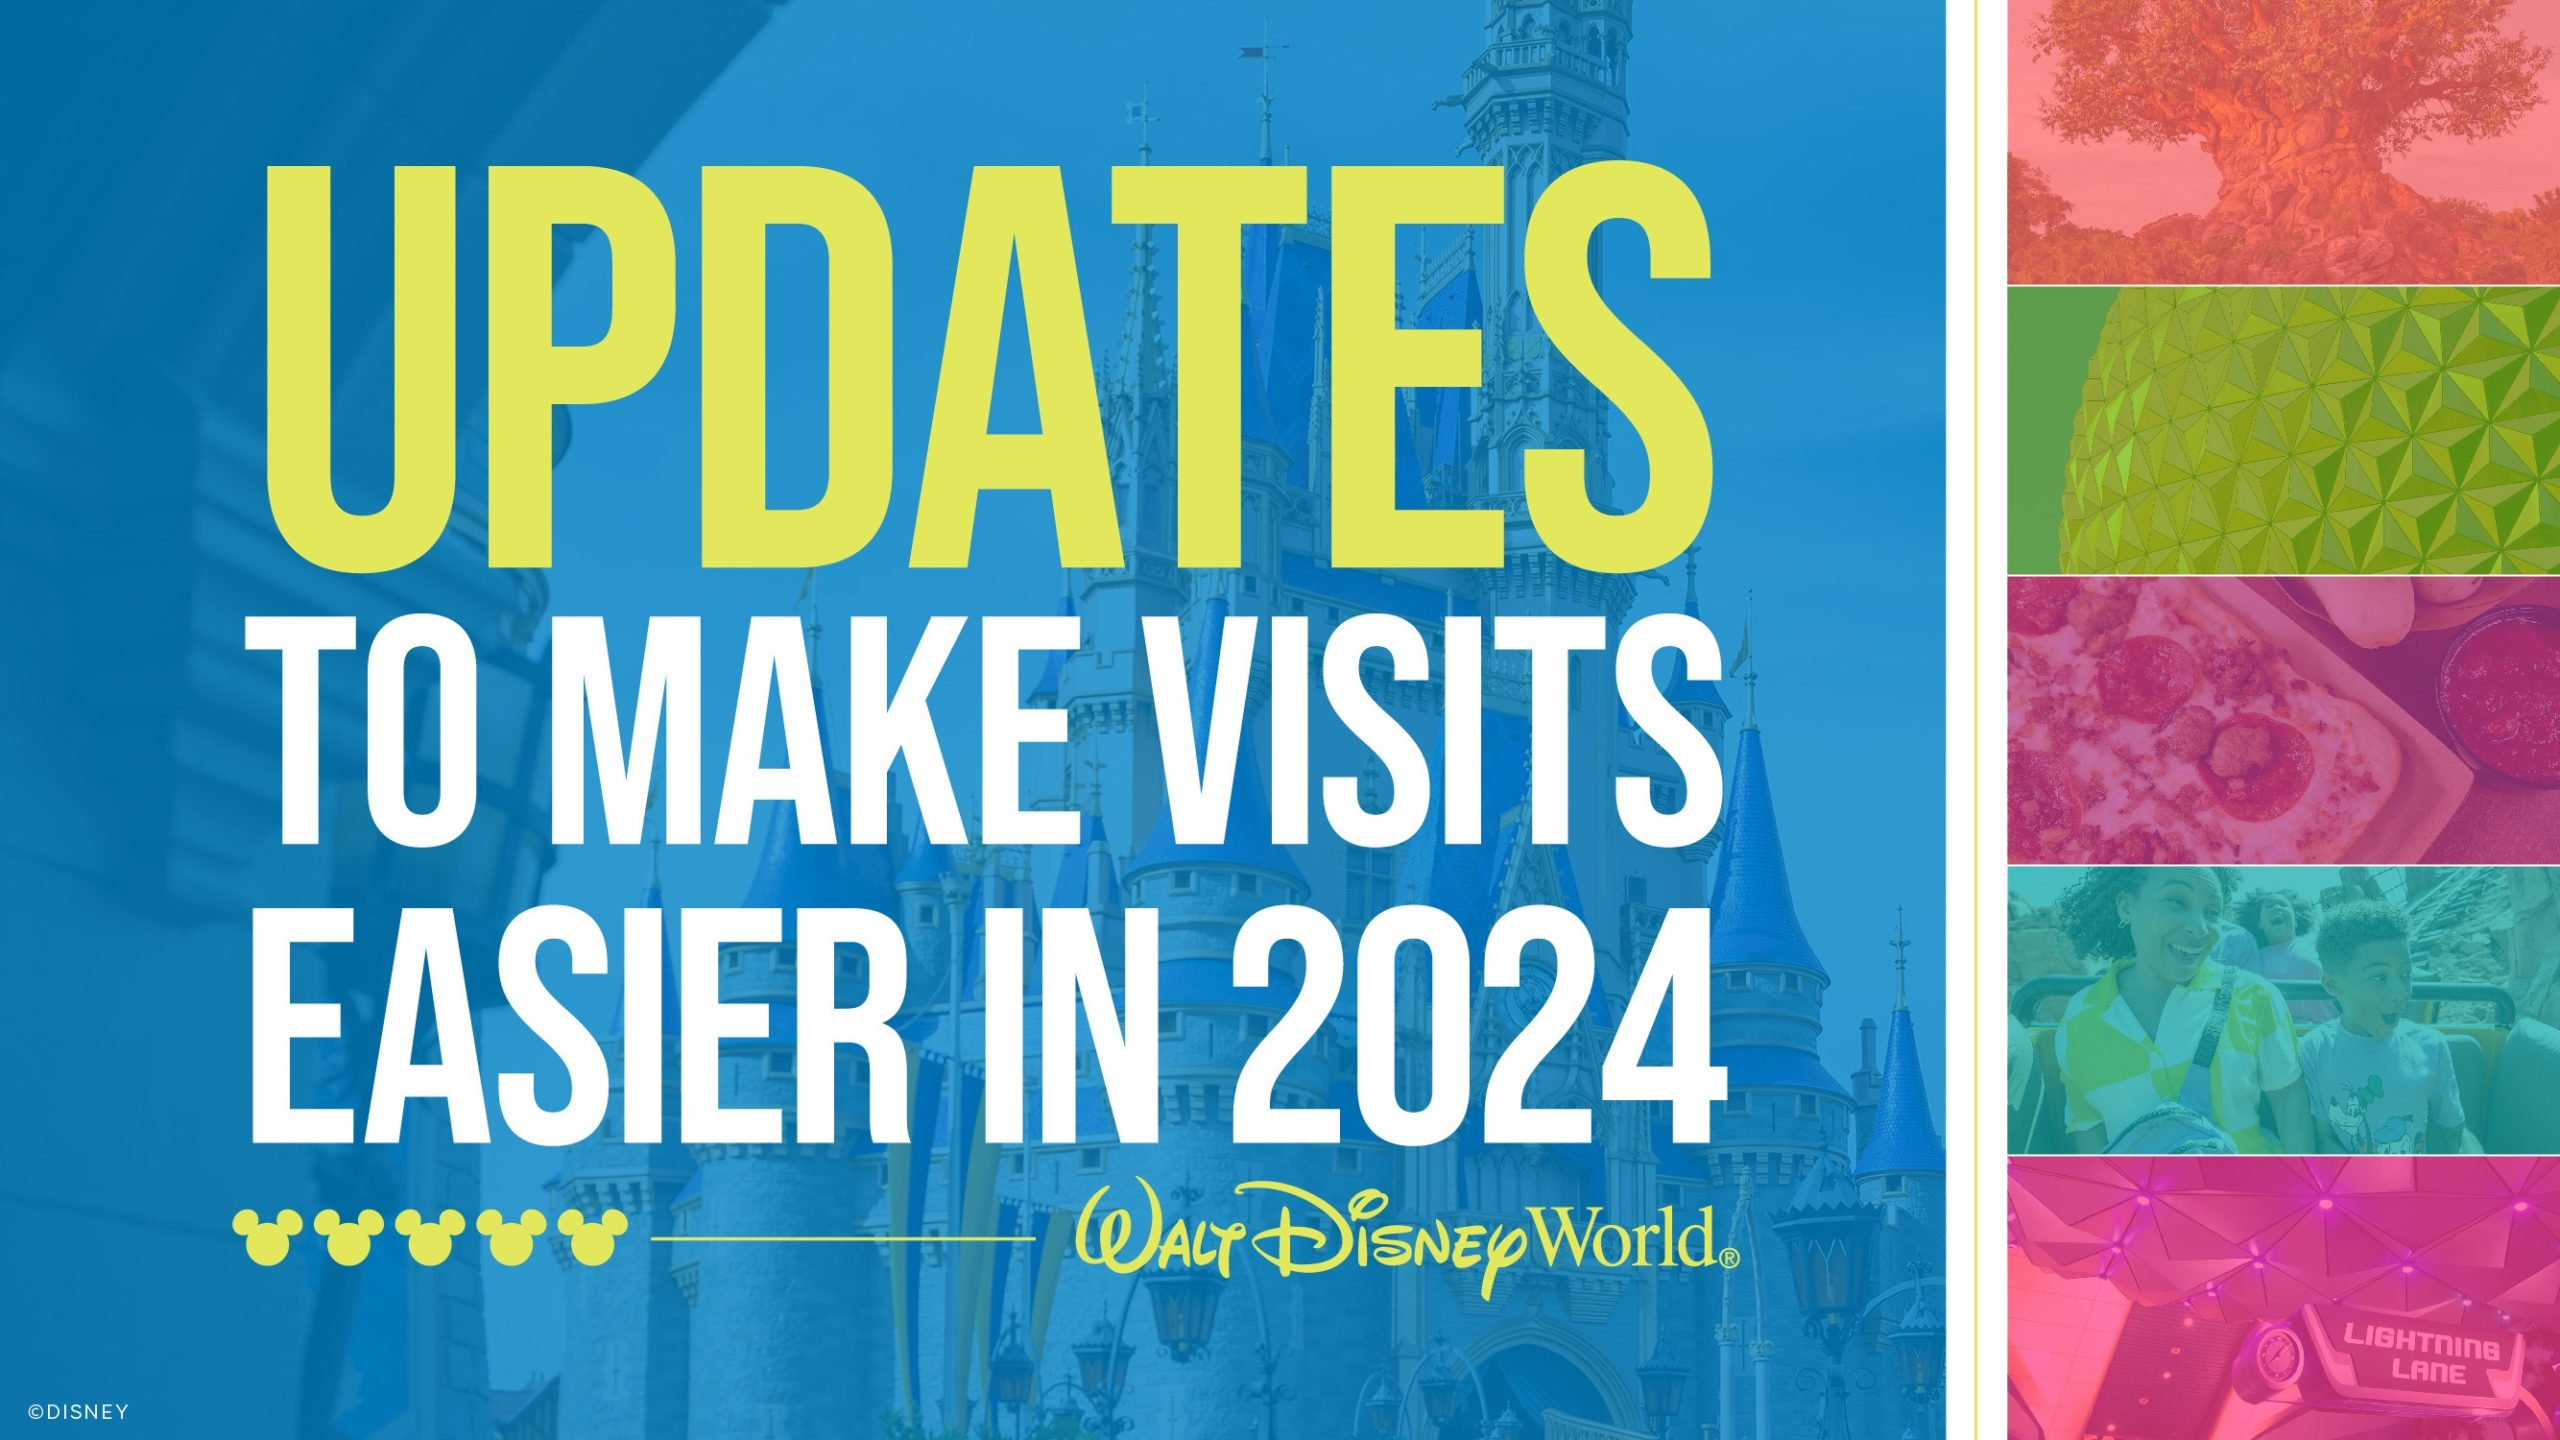 Exciting updates coming to Disney World in 2024, bringing new adventures, attractions, and magic to enhance your Disney experience.